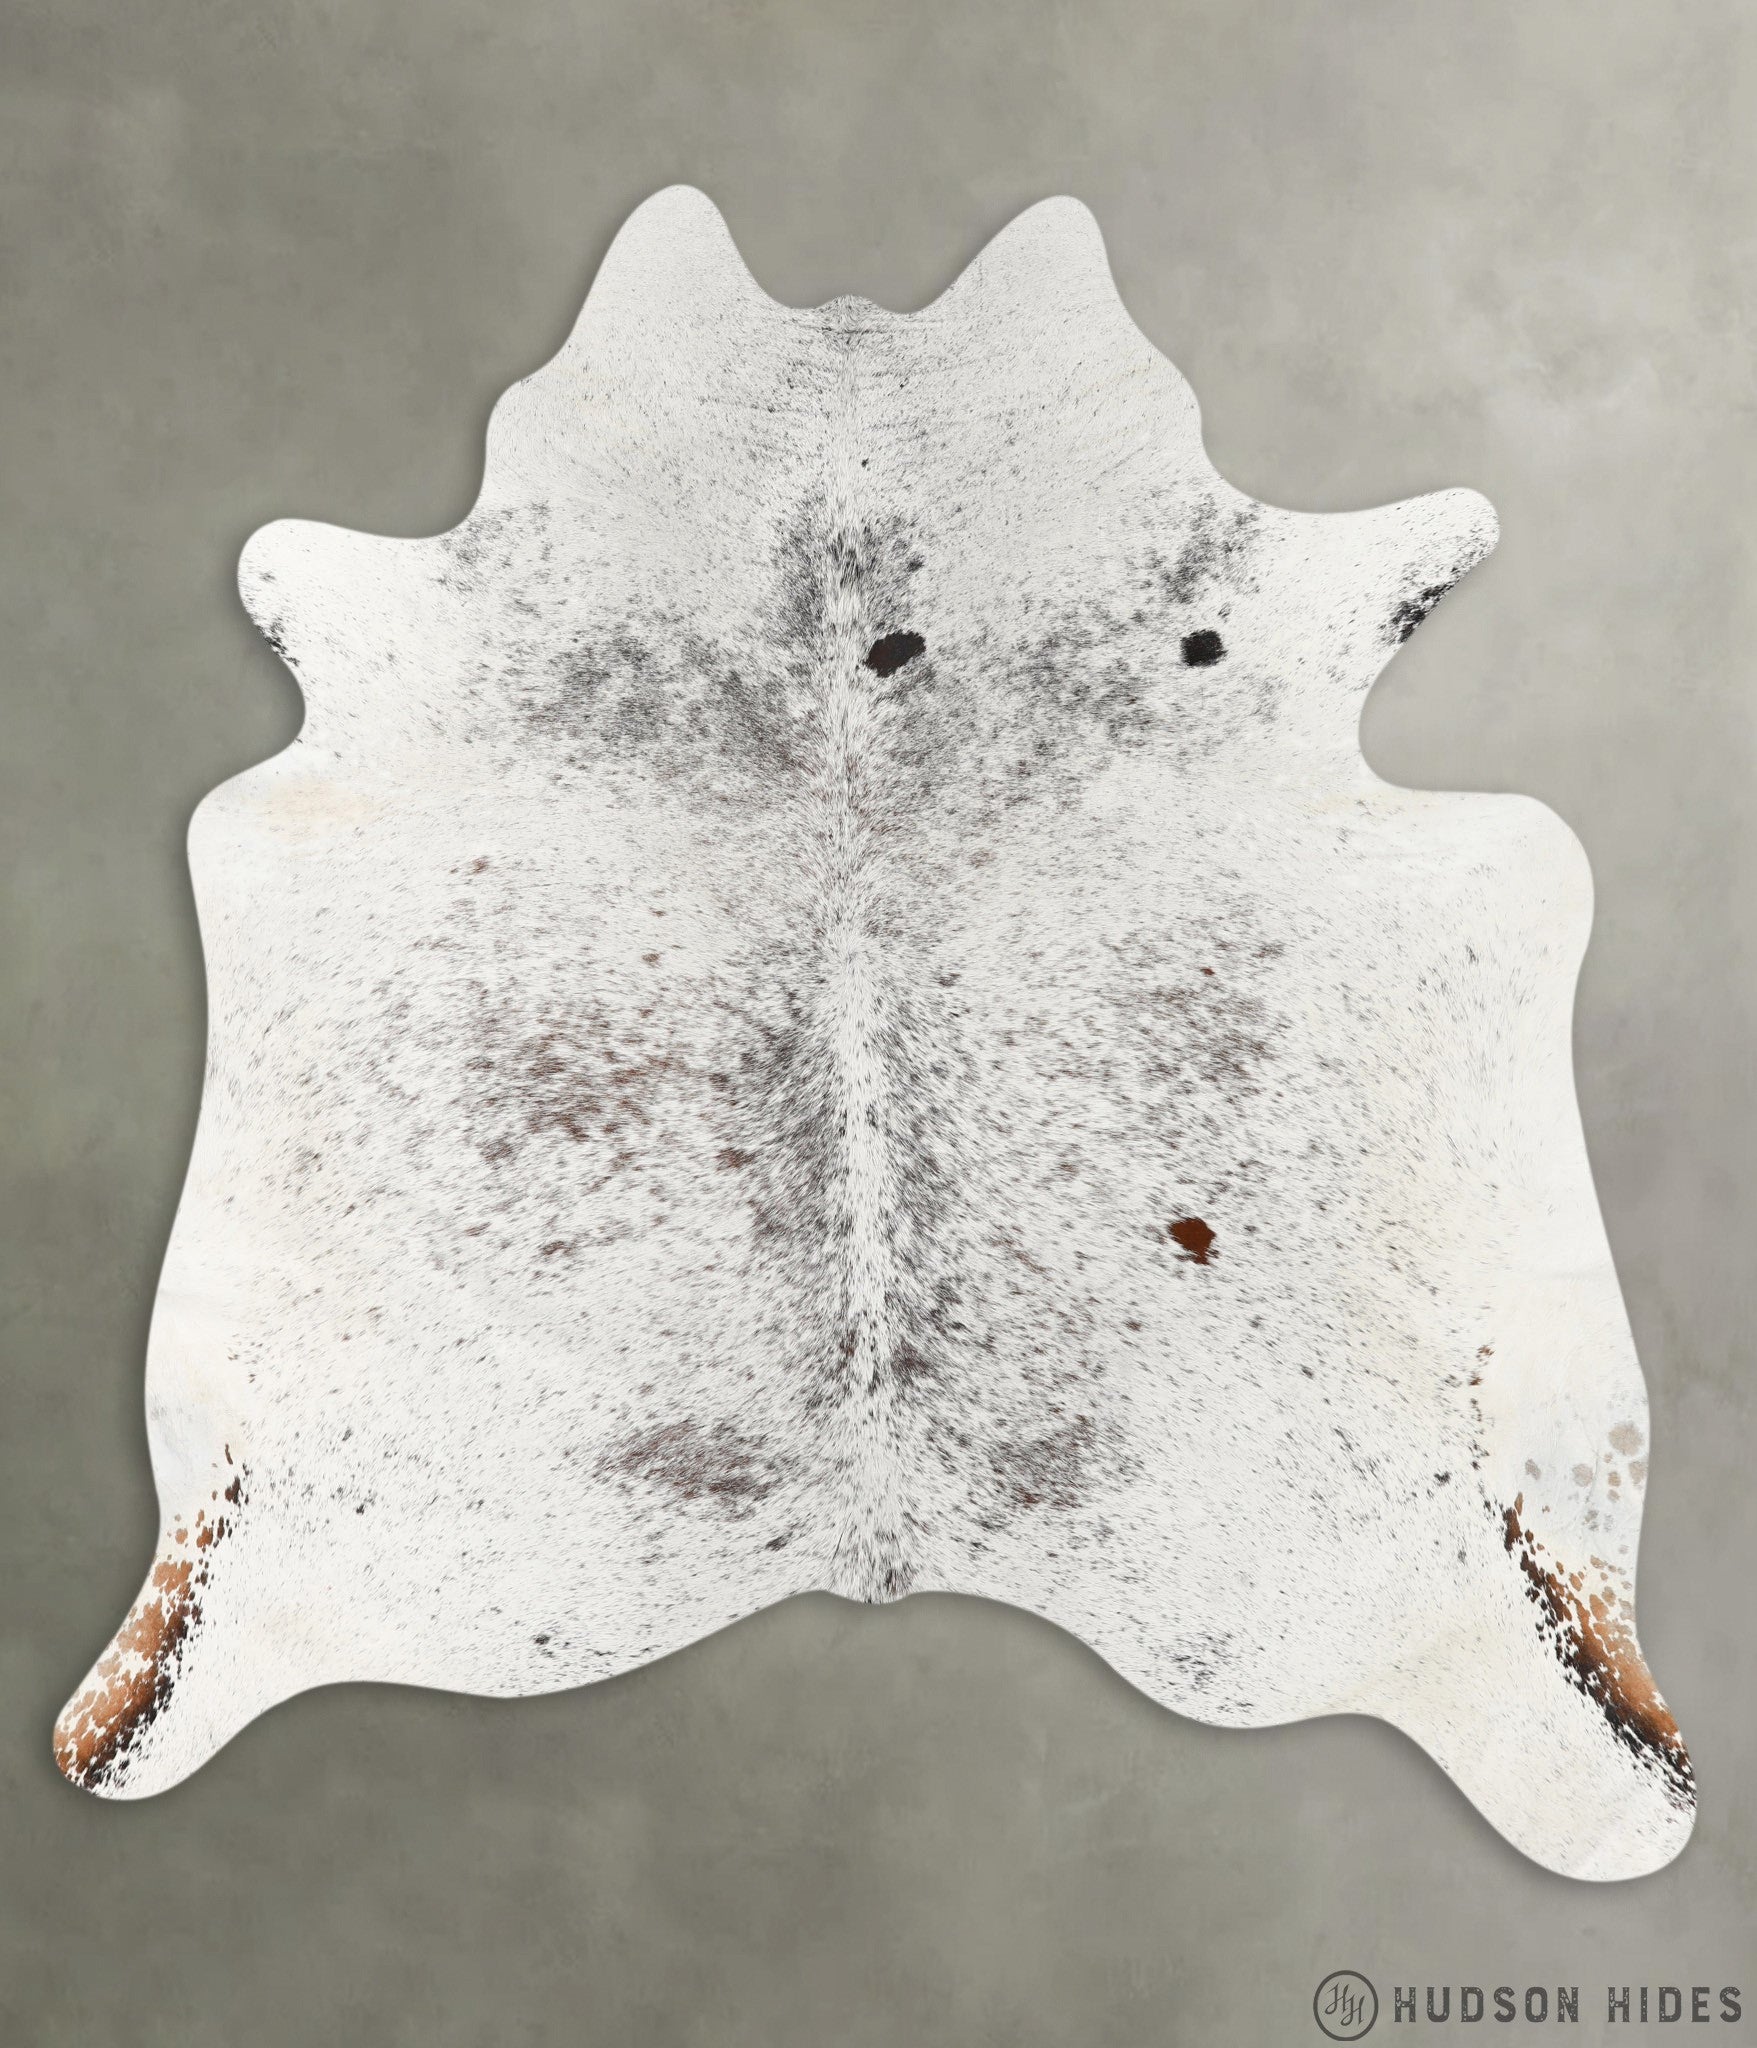 Salt and Pepper Brown XX-Large Brazilian Cowhide Rug 7'3"H x 7'1"W #22867 by Hudson Hides